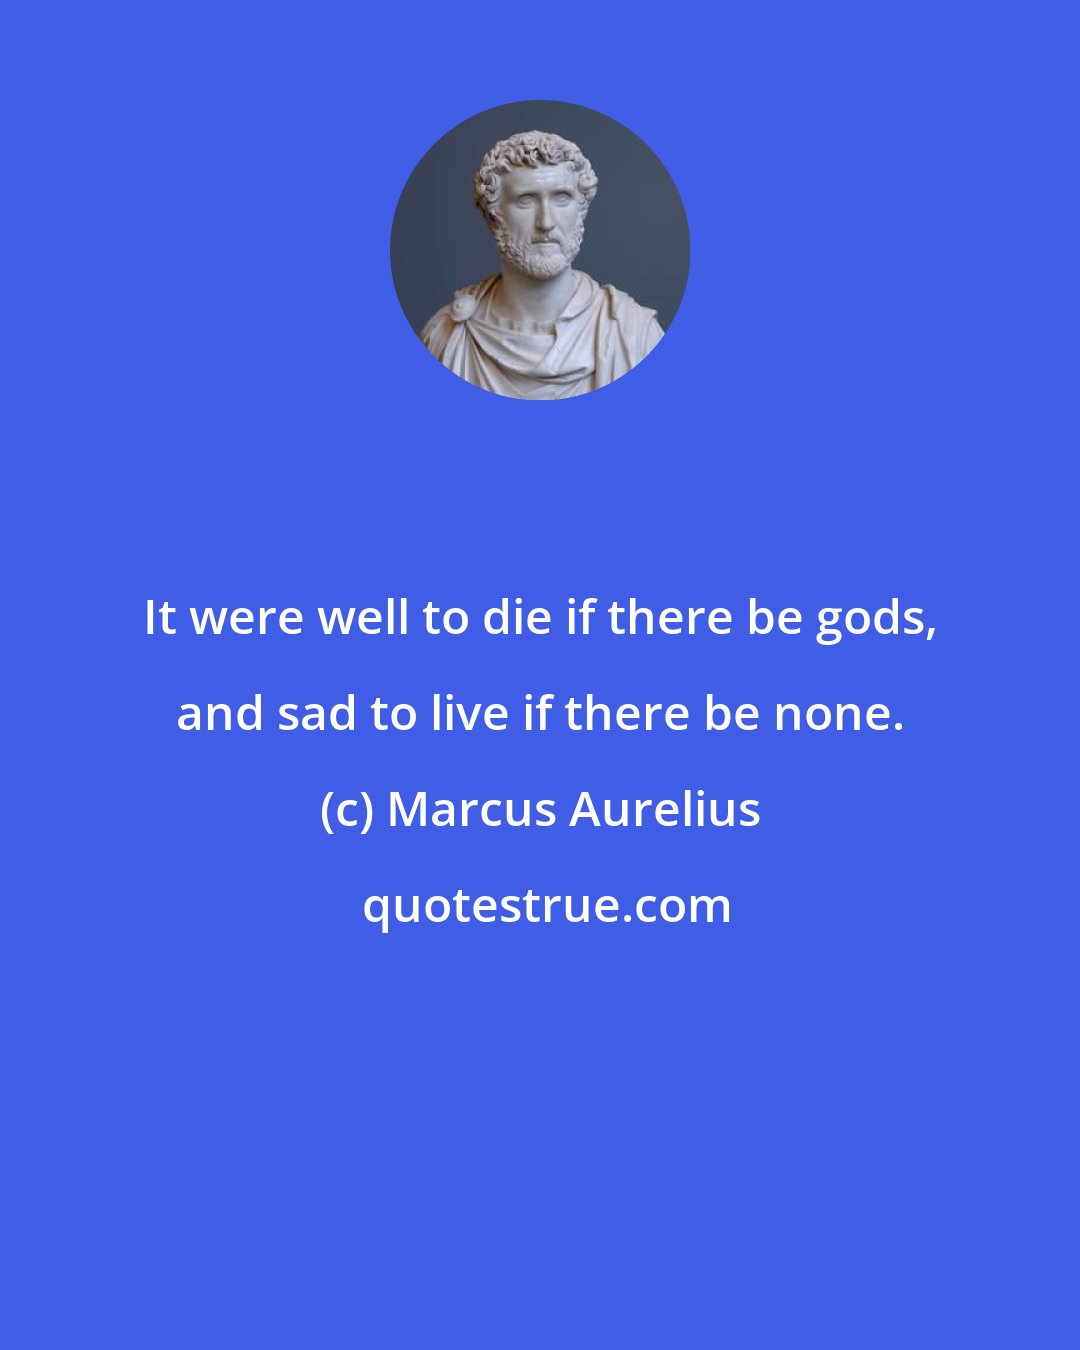 Marcus Aurelius: It were well to die if there be gods, and sad to live if there be none.